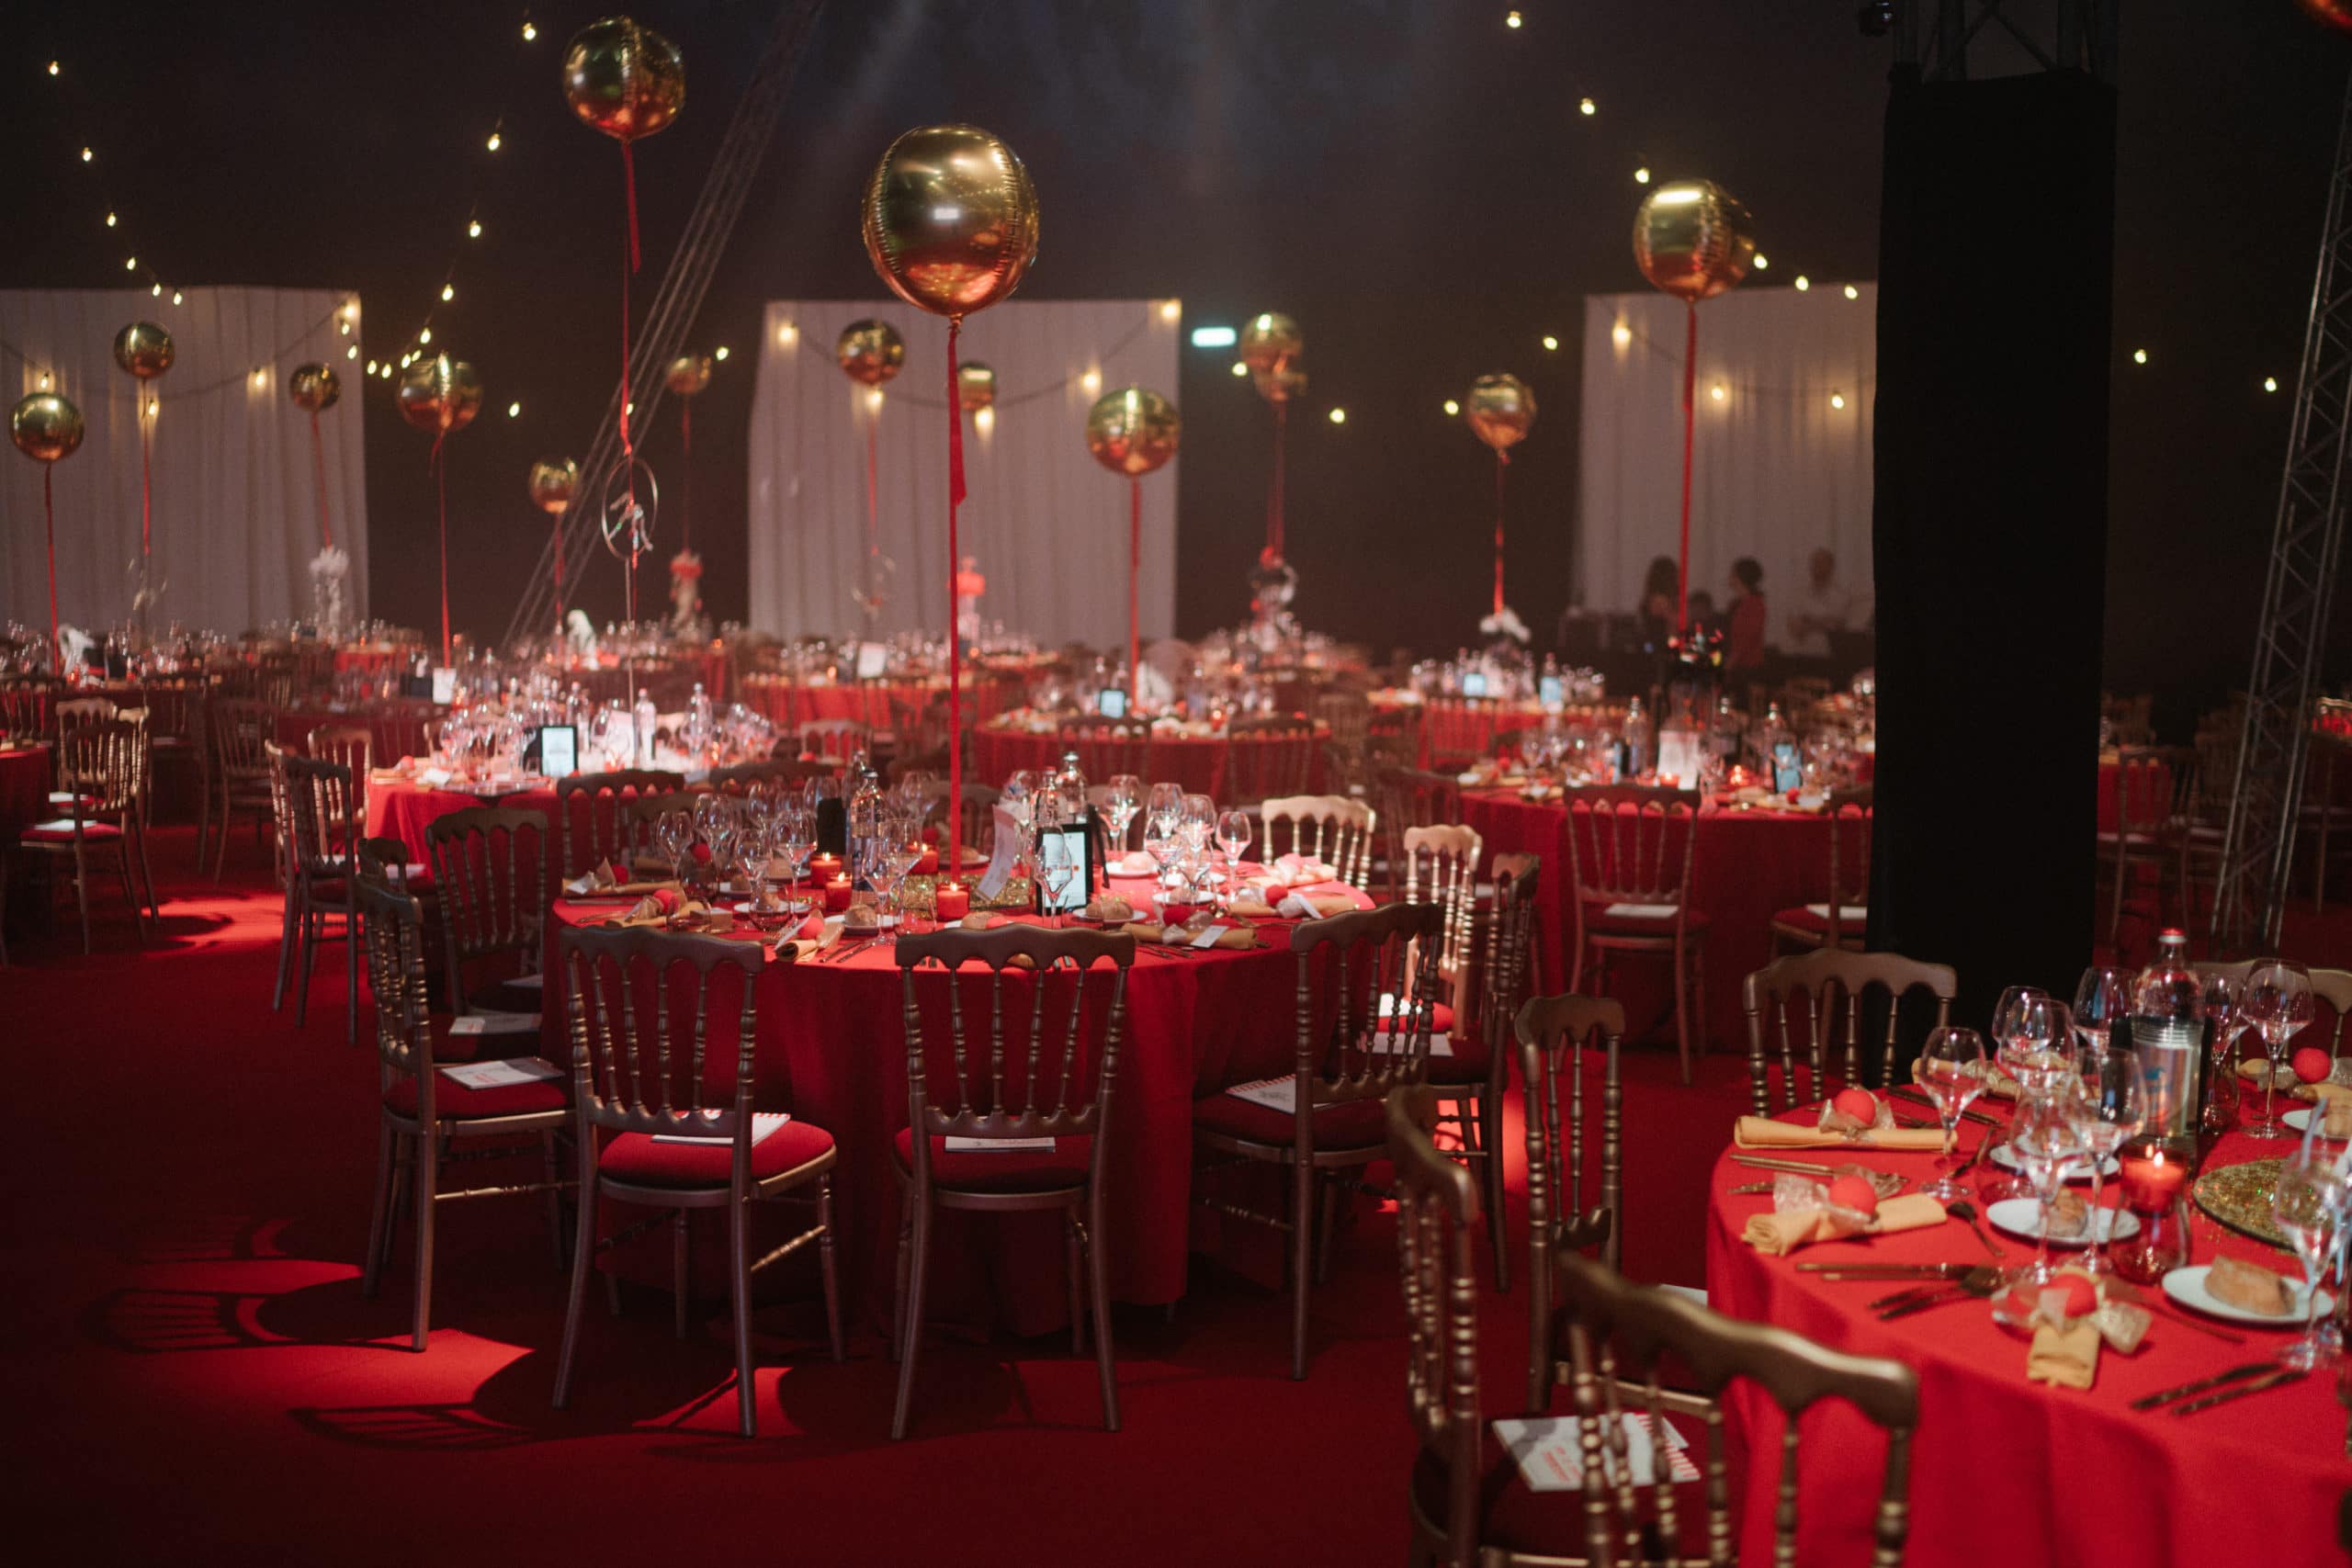 Shine a light event agency Luxembourg - Creates immersives experiences - The circus Red Cross Ball